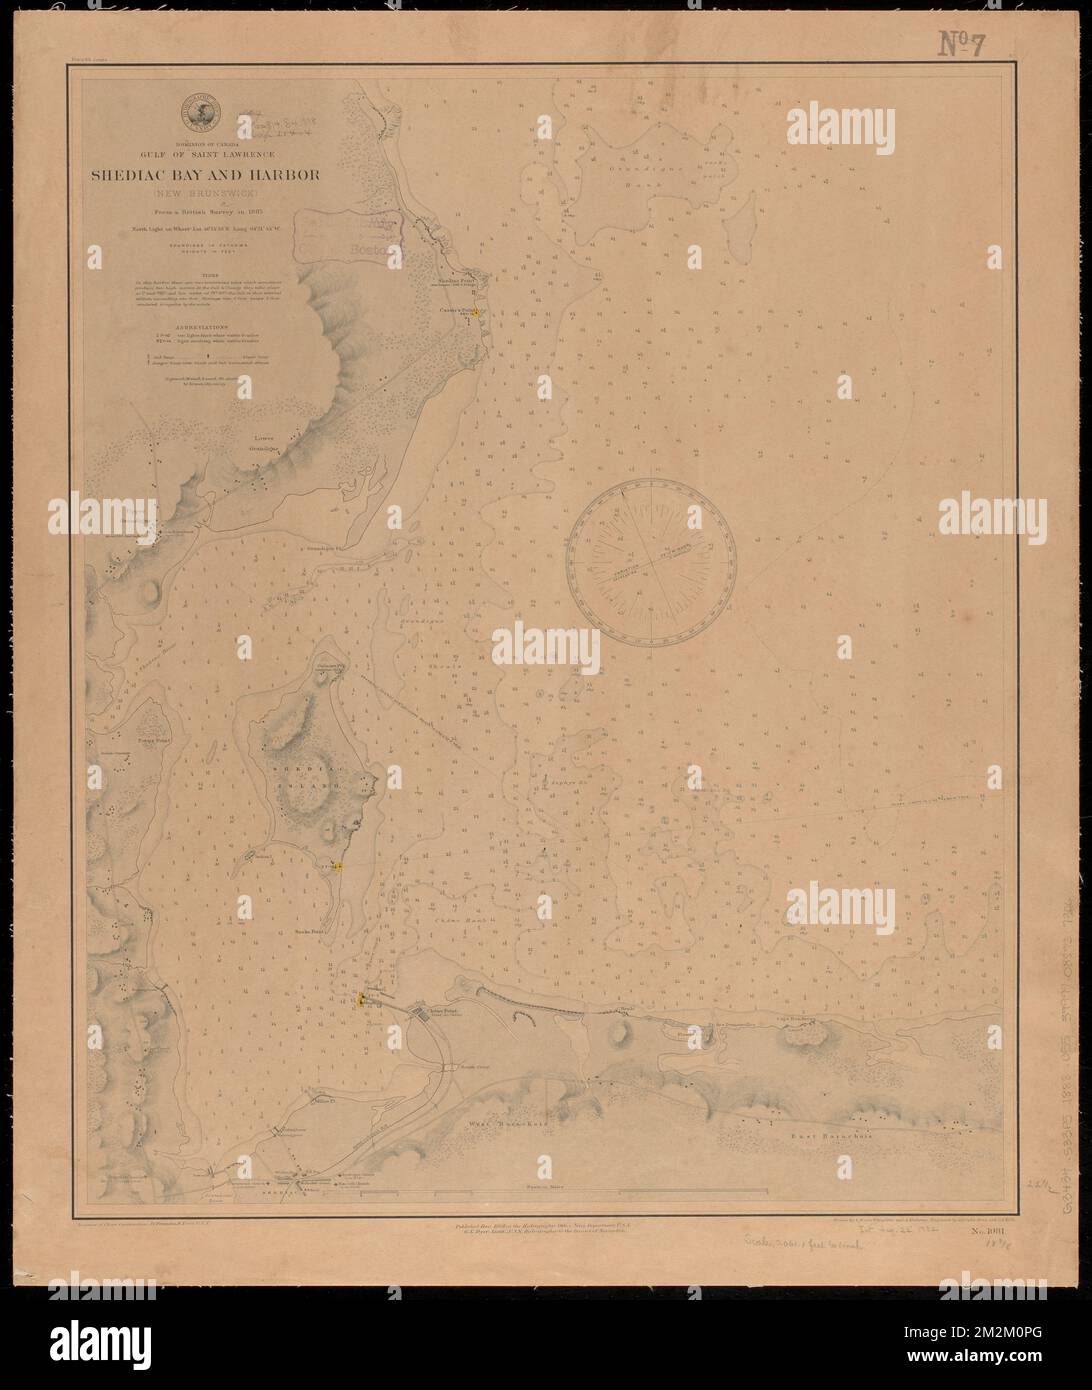 Dominion of Canada, Gulf of Saint Lawrence, Shediac Bay and Harbor (New Brunswick) : from a British survey in 1885 , Nautical charts, New Brunswick, Shediac Bay, Harbors, New Brunswick, Shediac, Maps, Shediac Bay N.B., Maps Norman B. Leventhal Map Center Collection Stock Photo